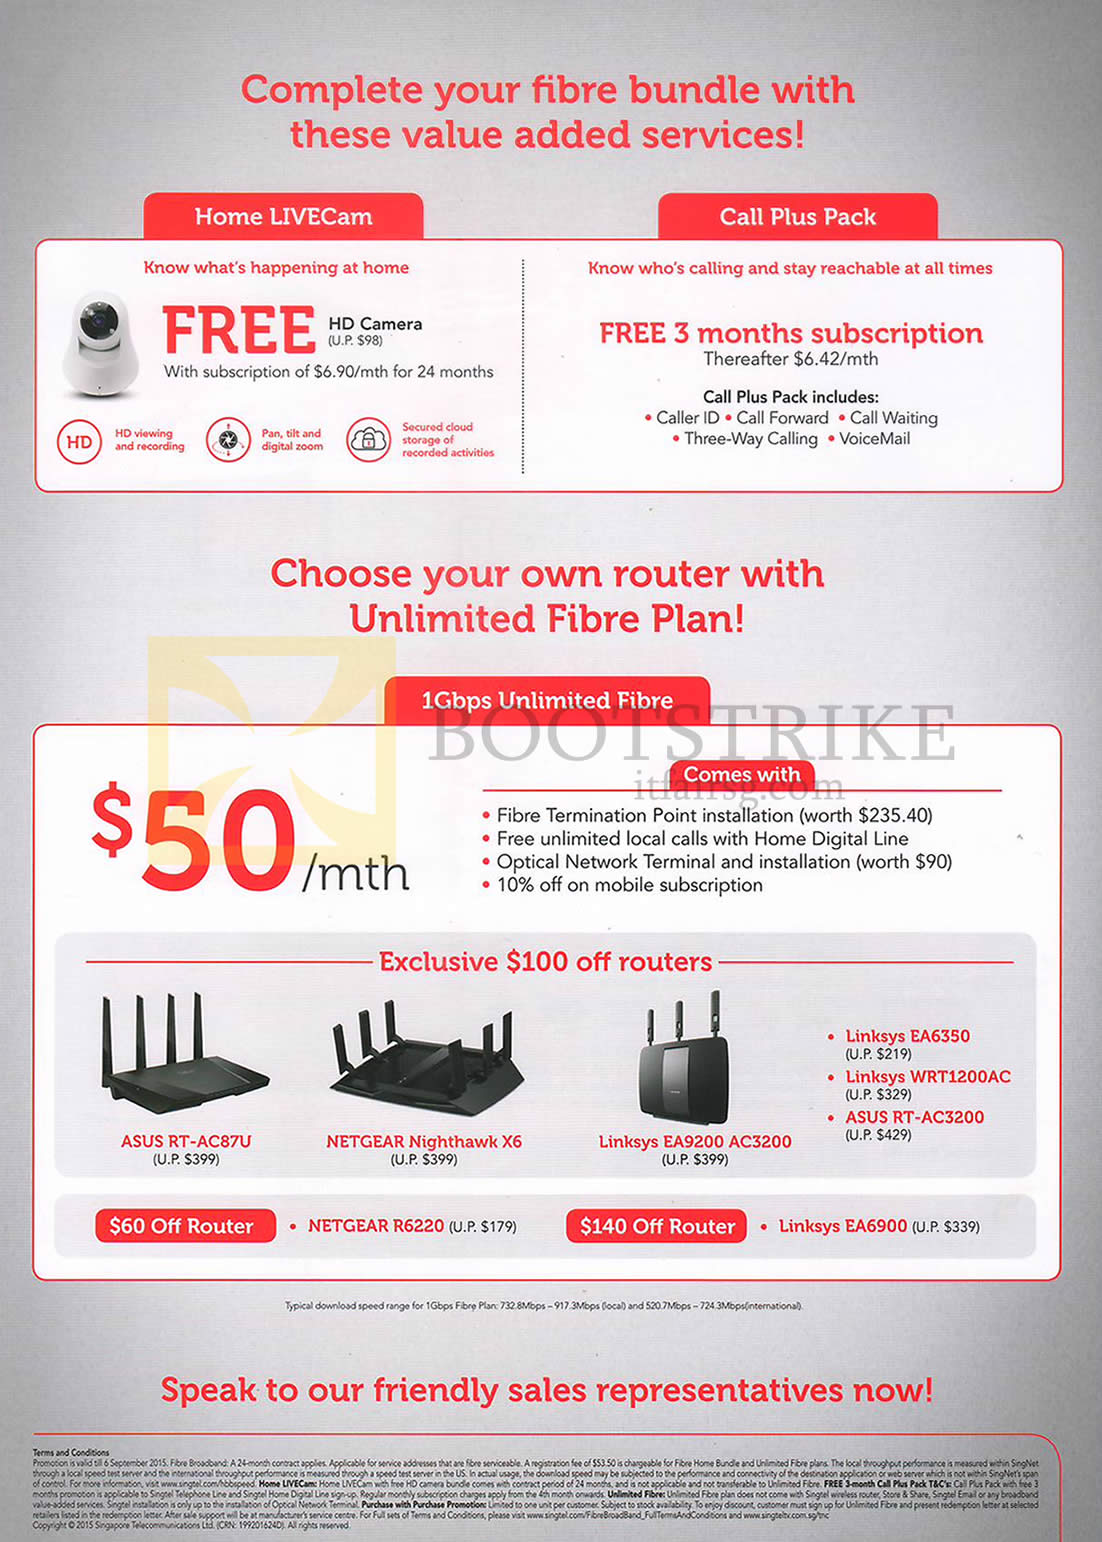 COMEX 2015 price list image brochure of Singtel Home LiveCam, Call Plus Pack, 1Gbps Unlimited Fibre, 100 Dollar Off Routers